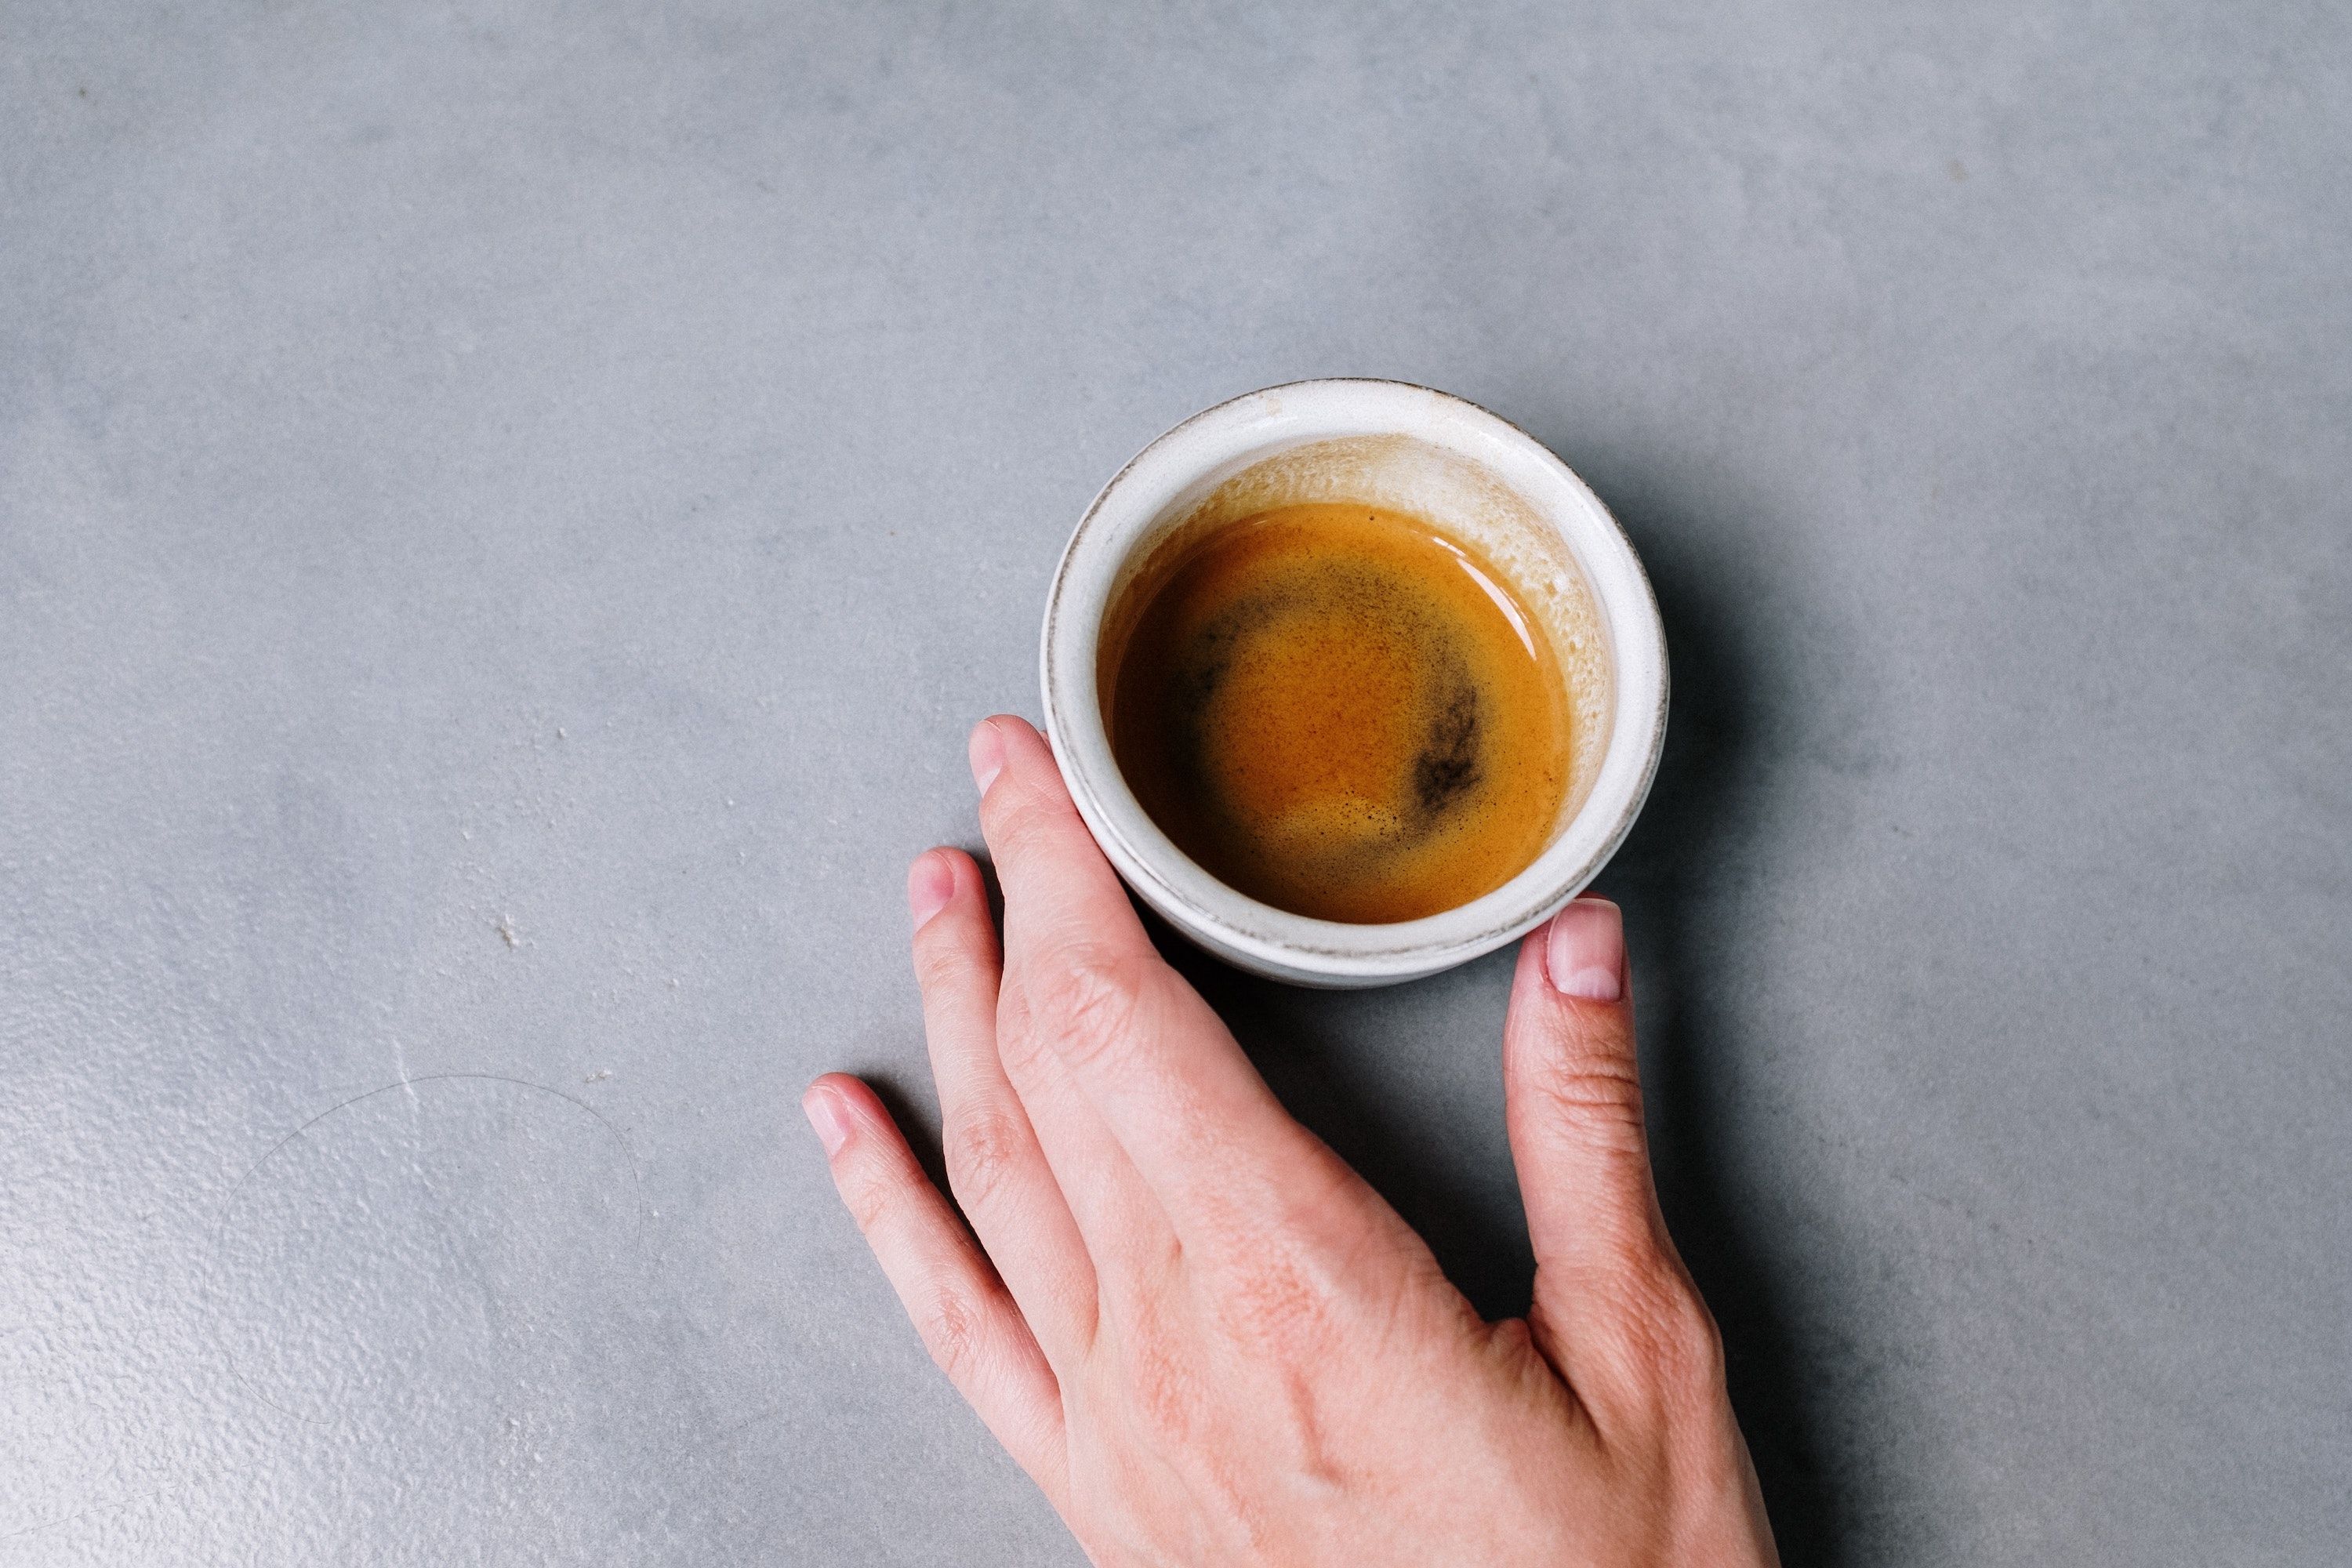 Hand holds lip of espresso cup on gray surface